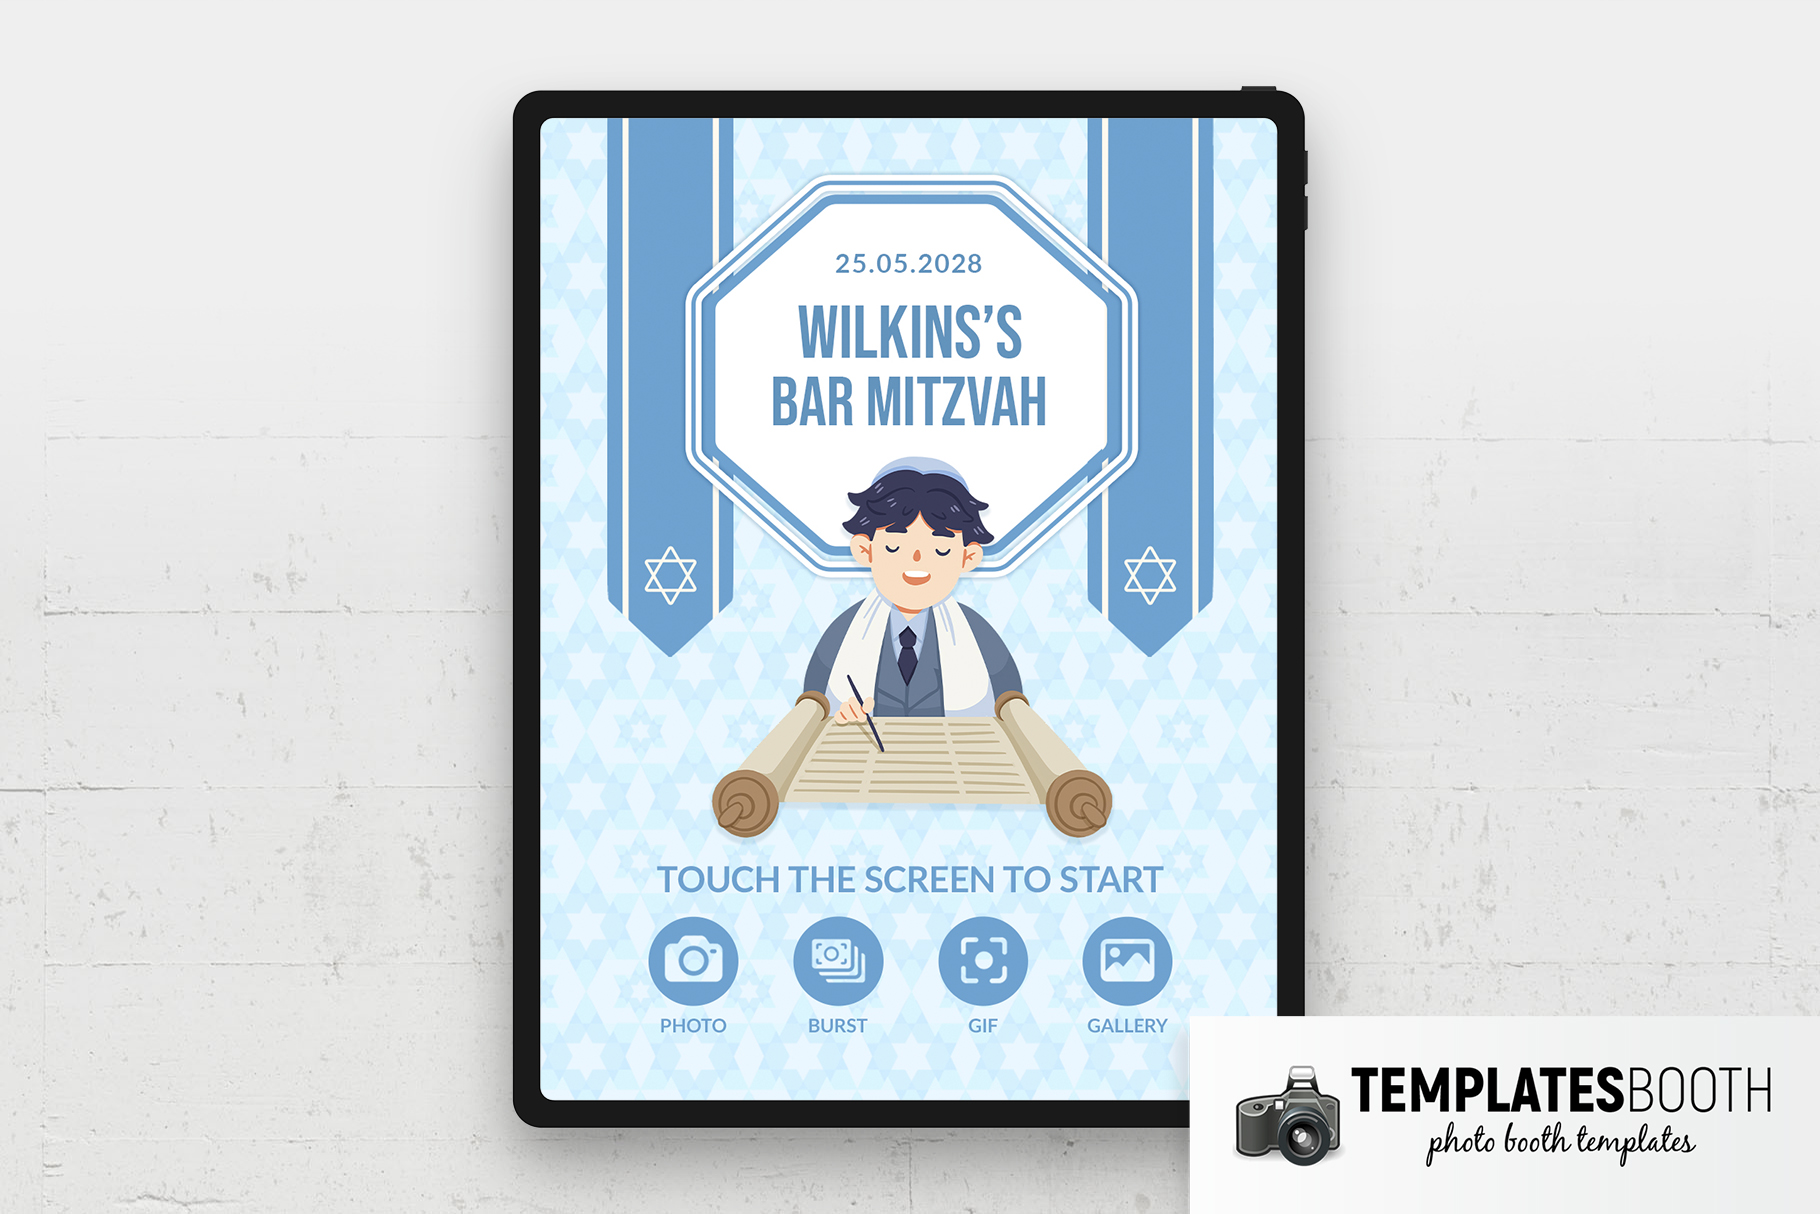 Bar Mitzvah Photo Booth Welcome Screen